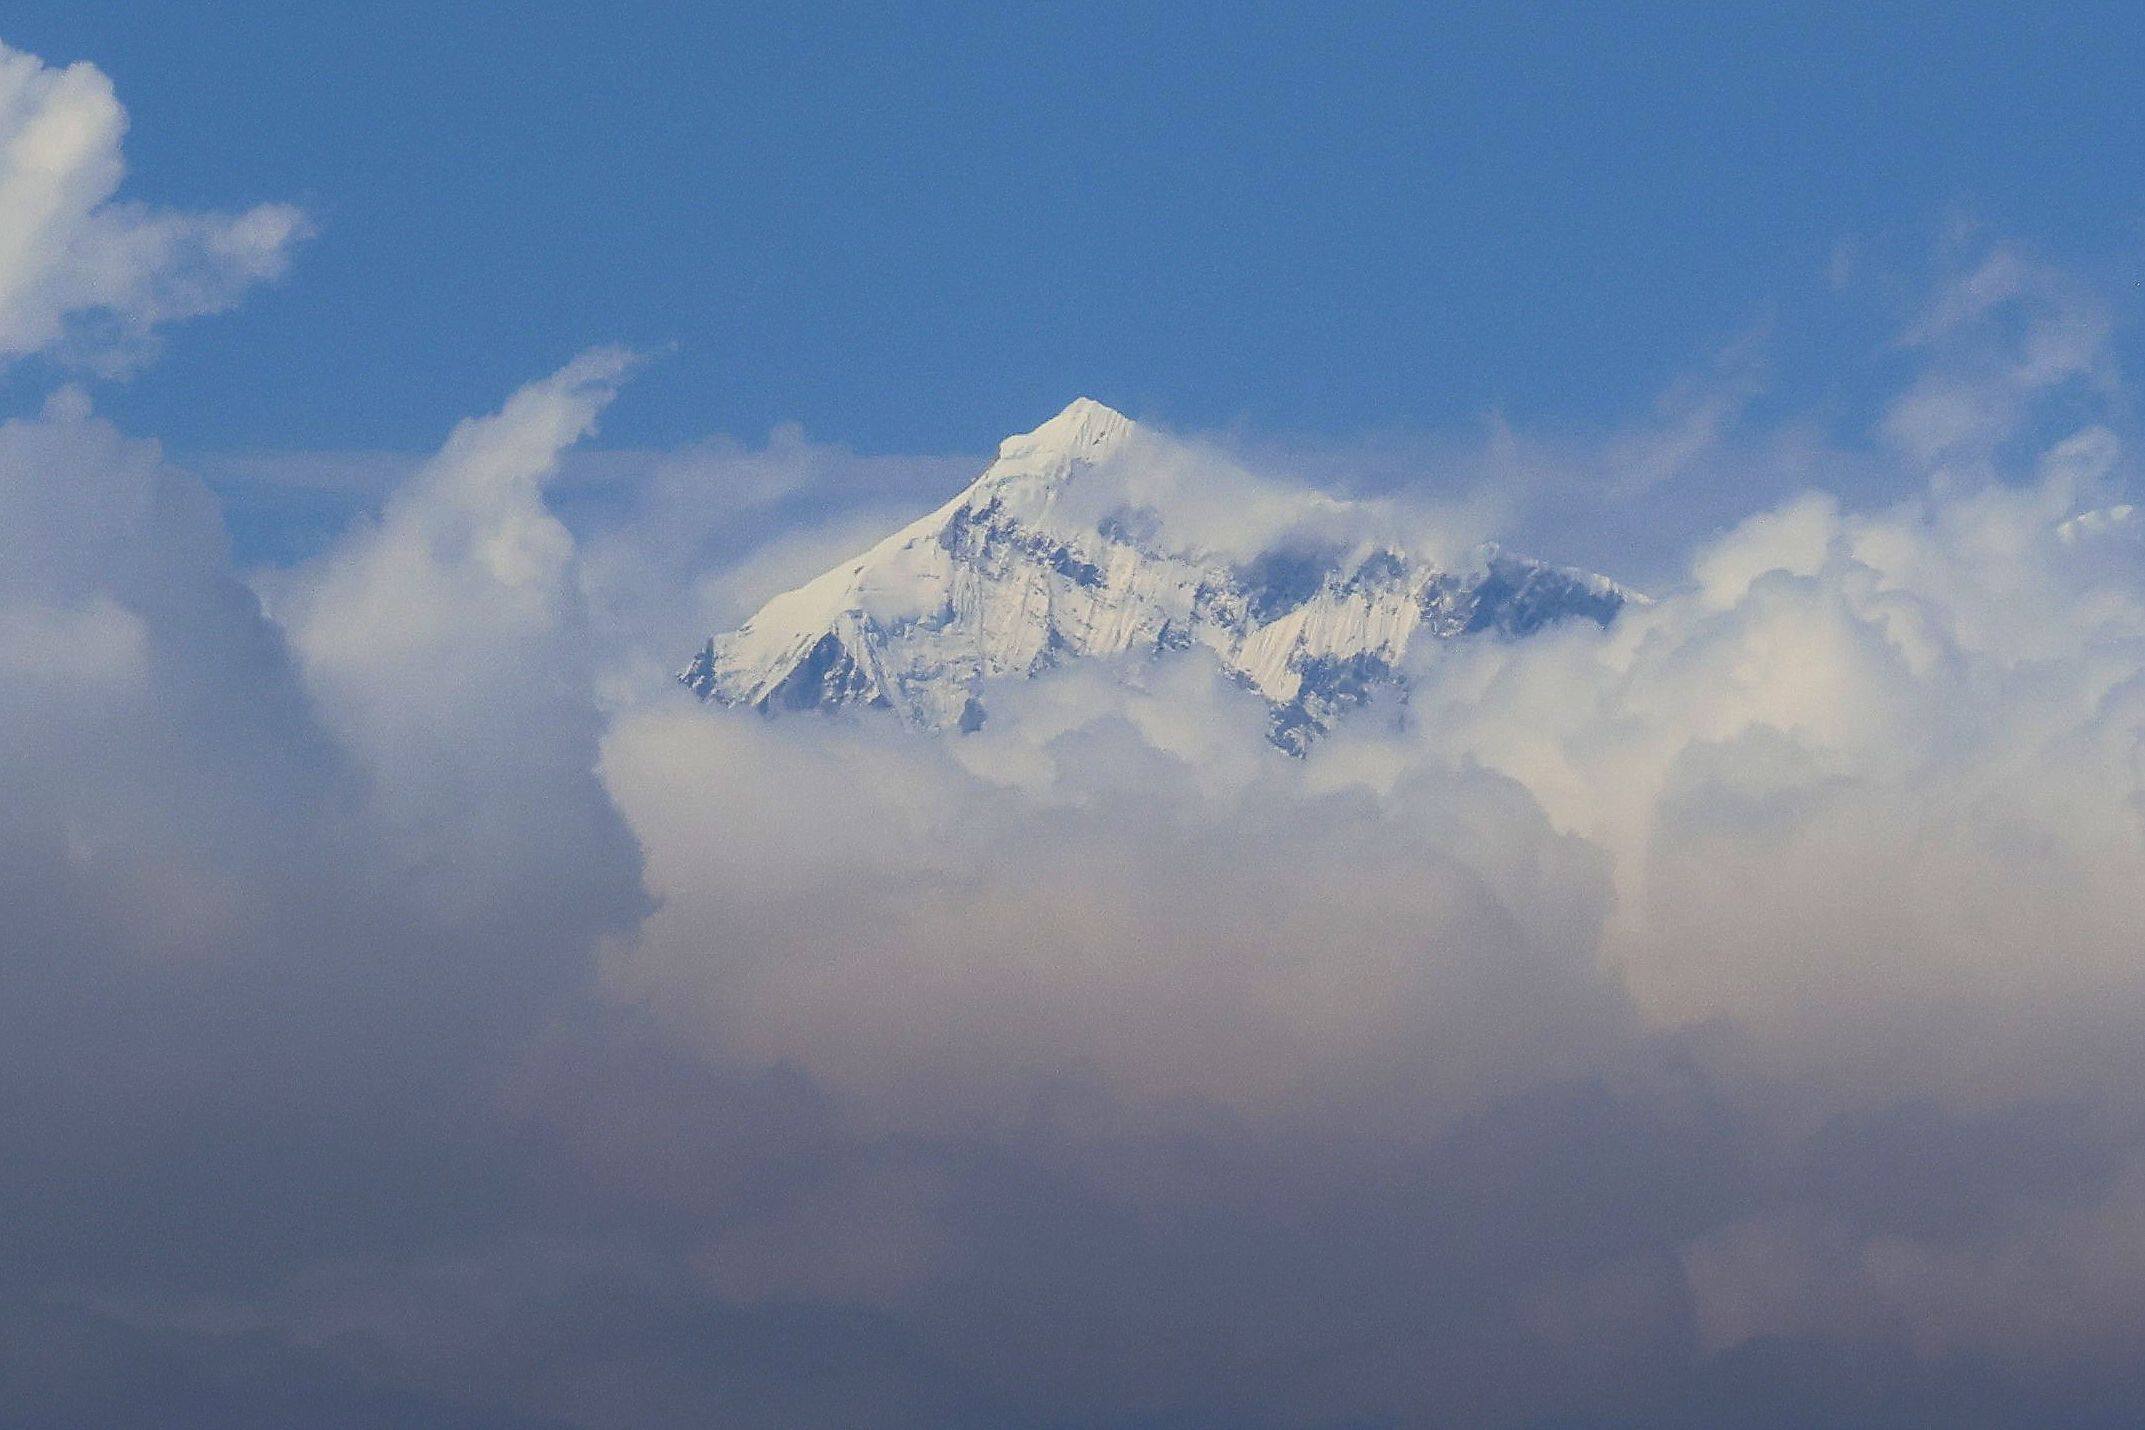 Mount Everest, the highest mountain in the world at 8,848 metres, in Nepal’s Himalayas range. Photo: AFP